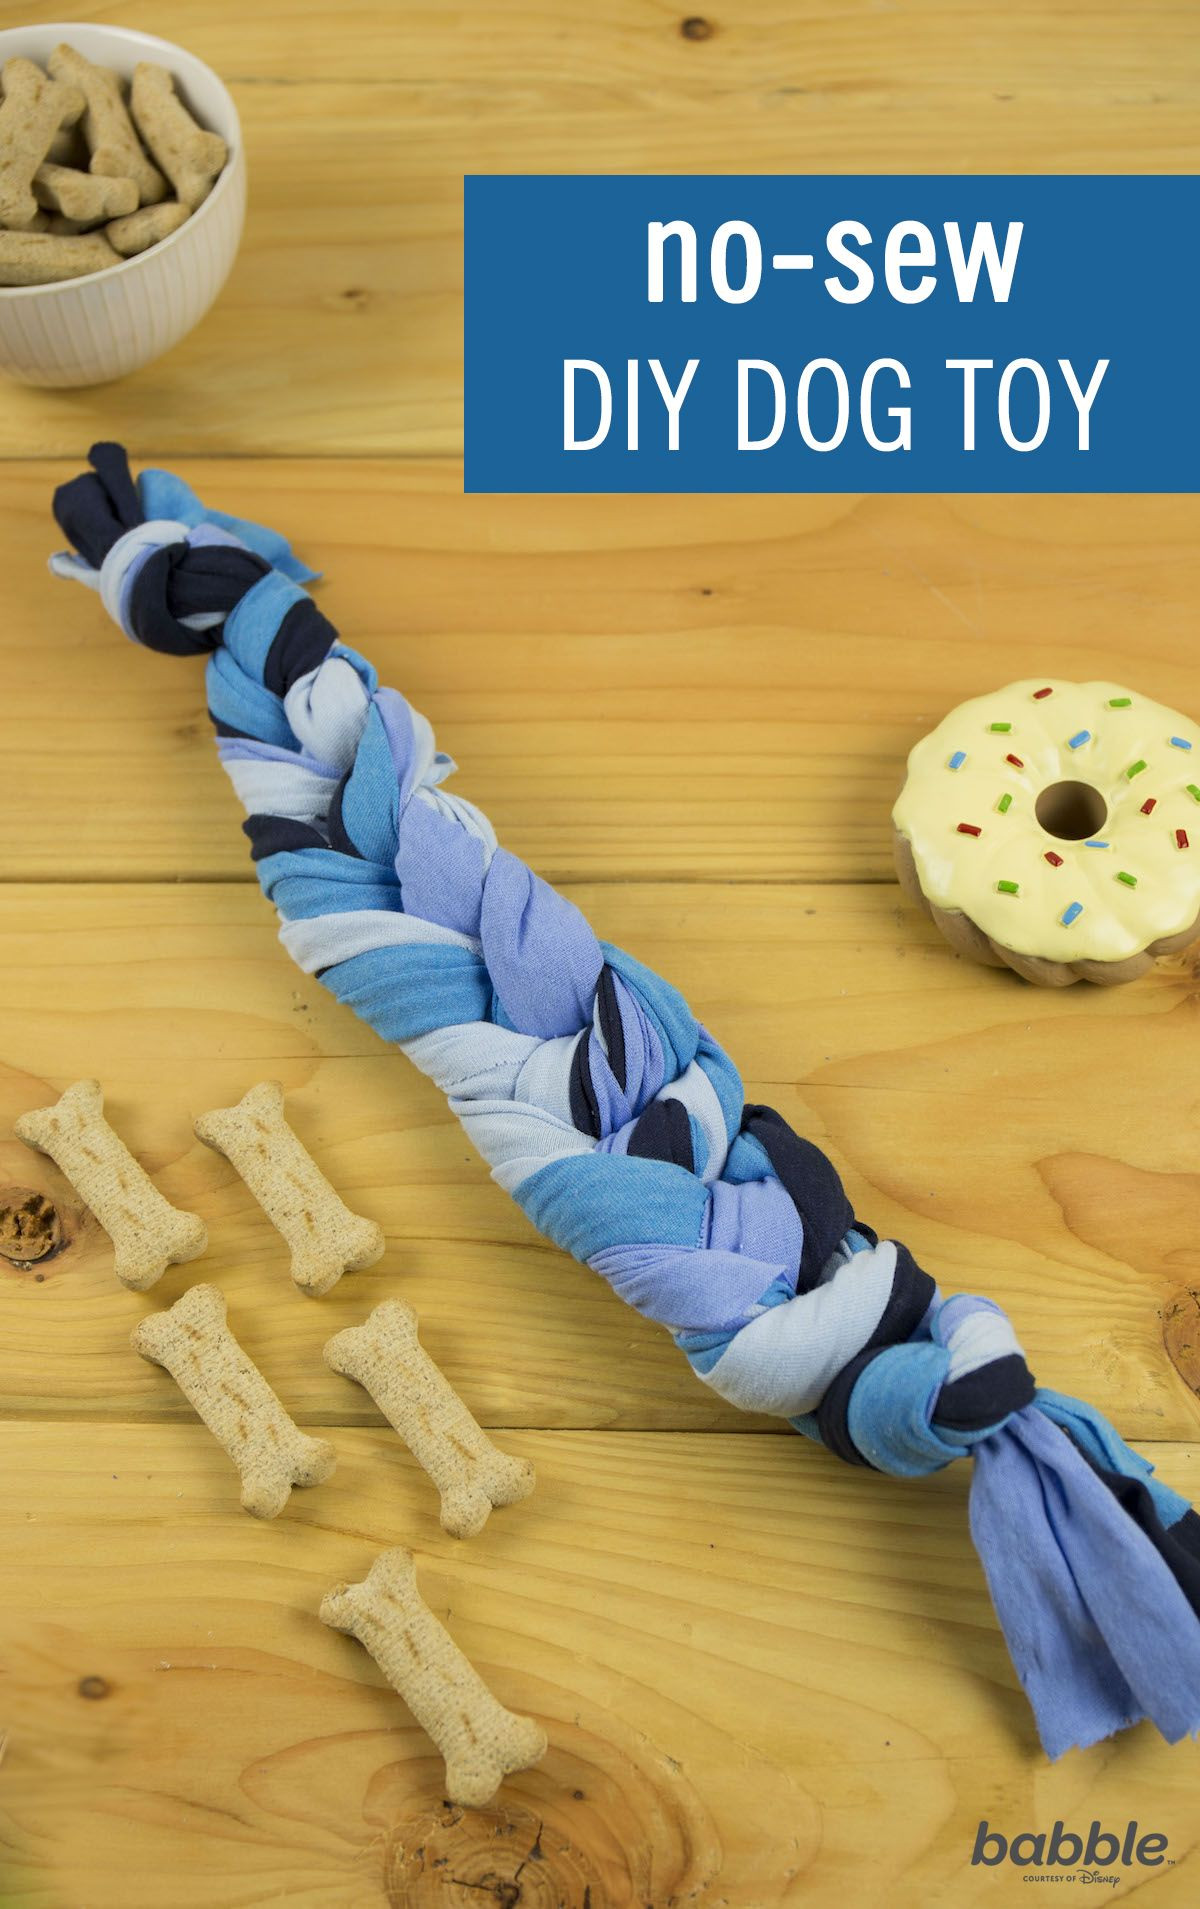 DIY Dog Toy
 These No Sew DIY Dog Toys Are Sure to Make a Puppy s Day